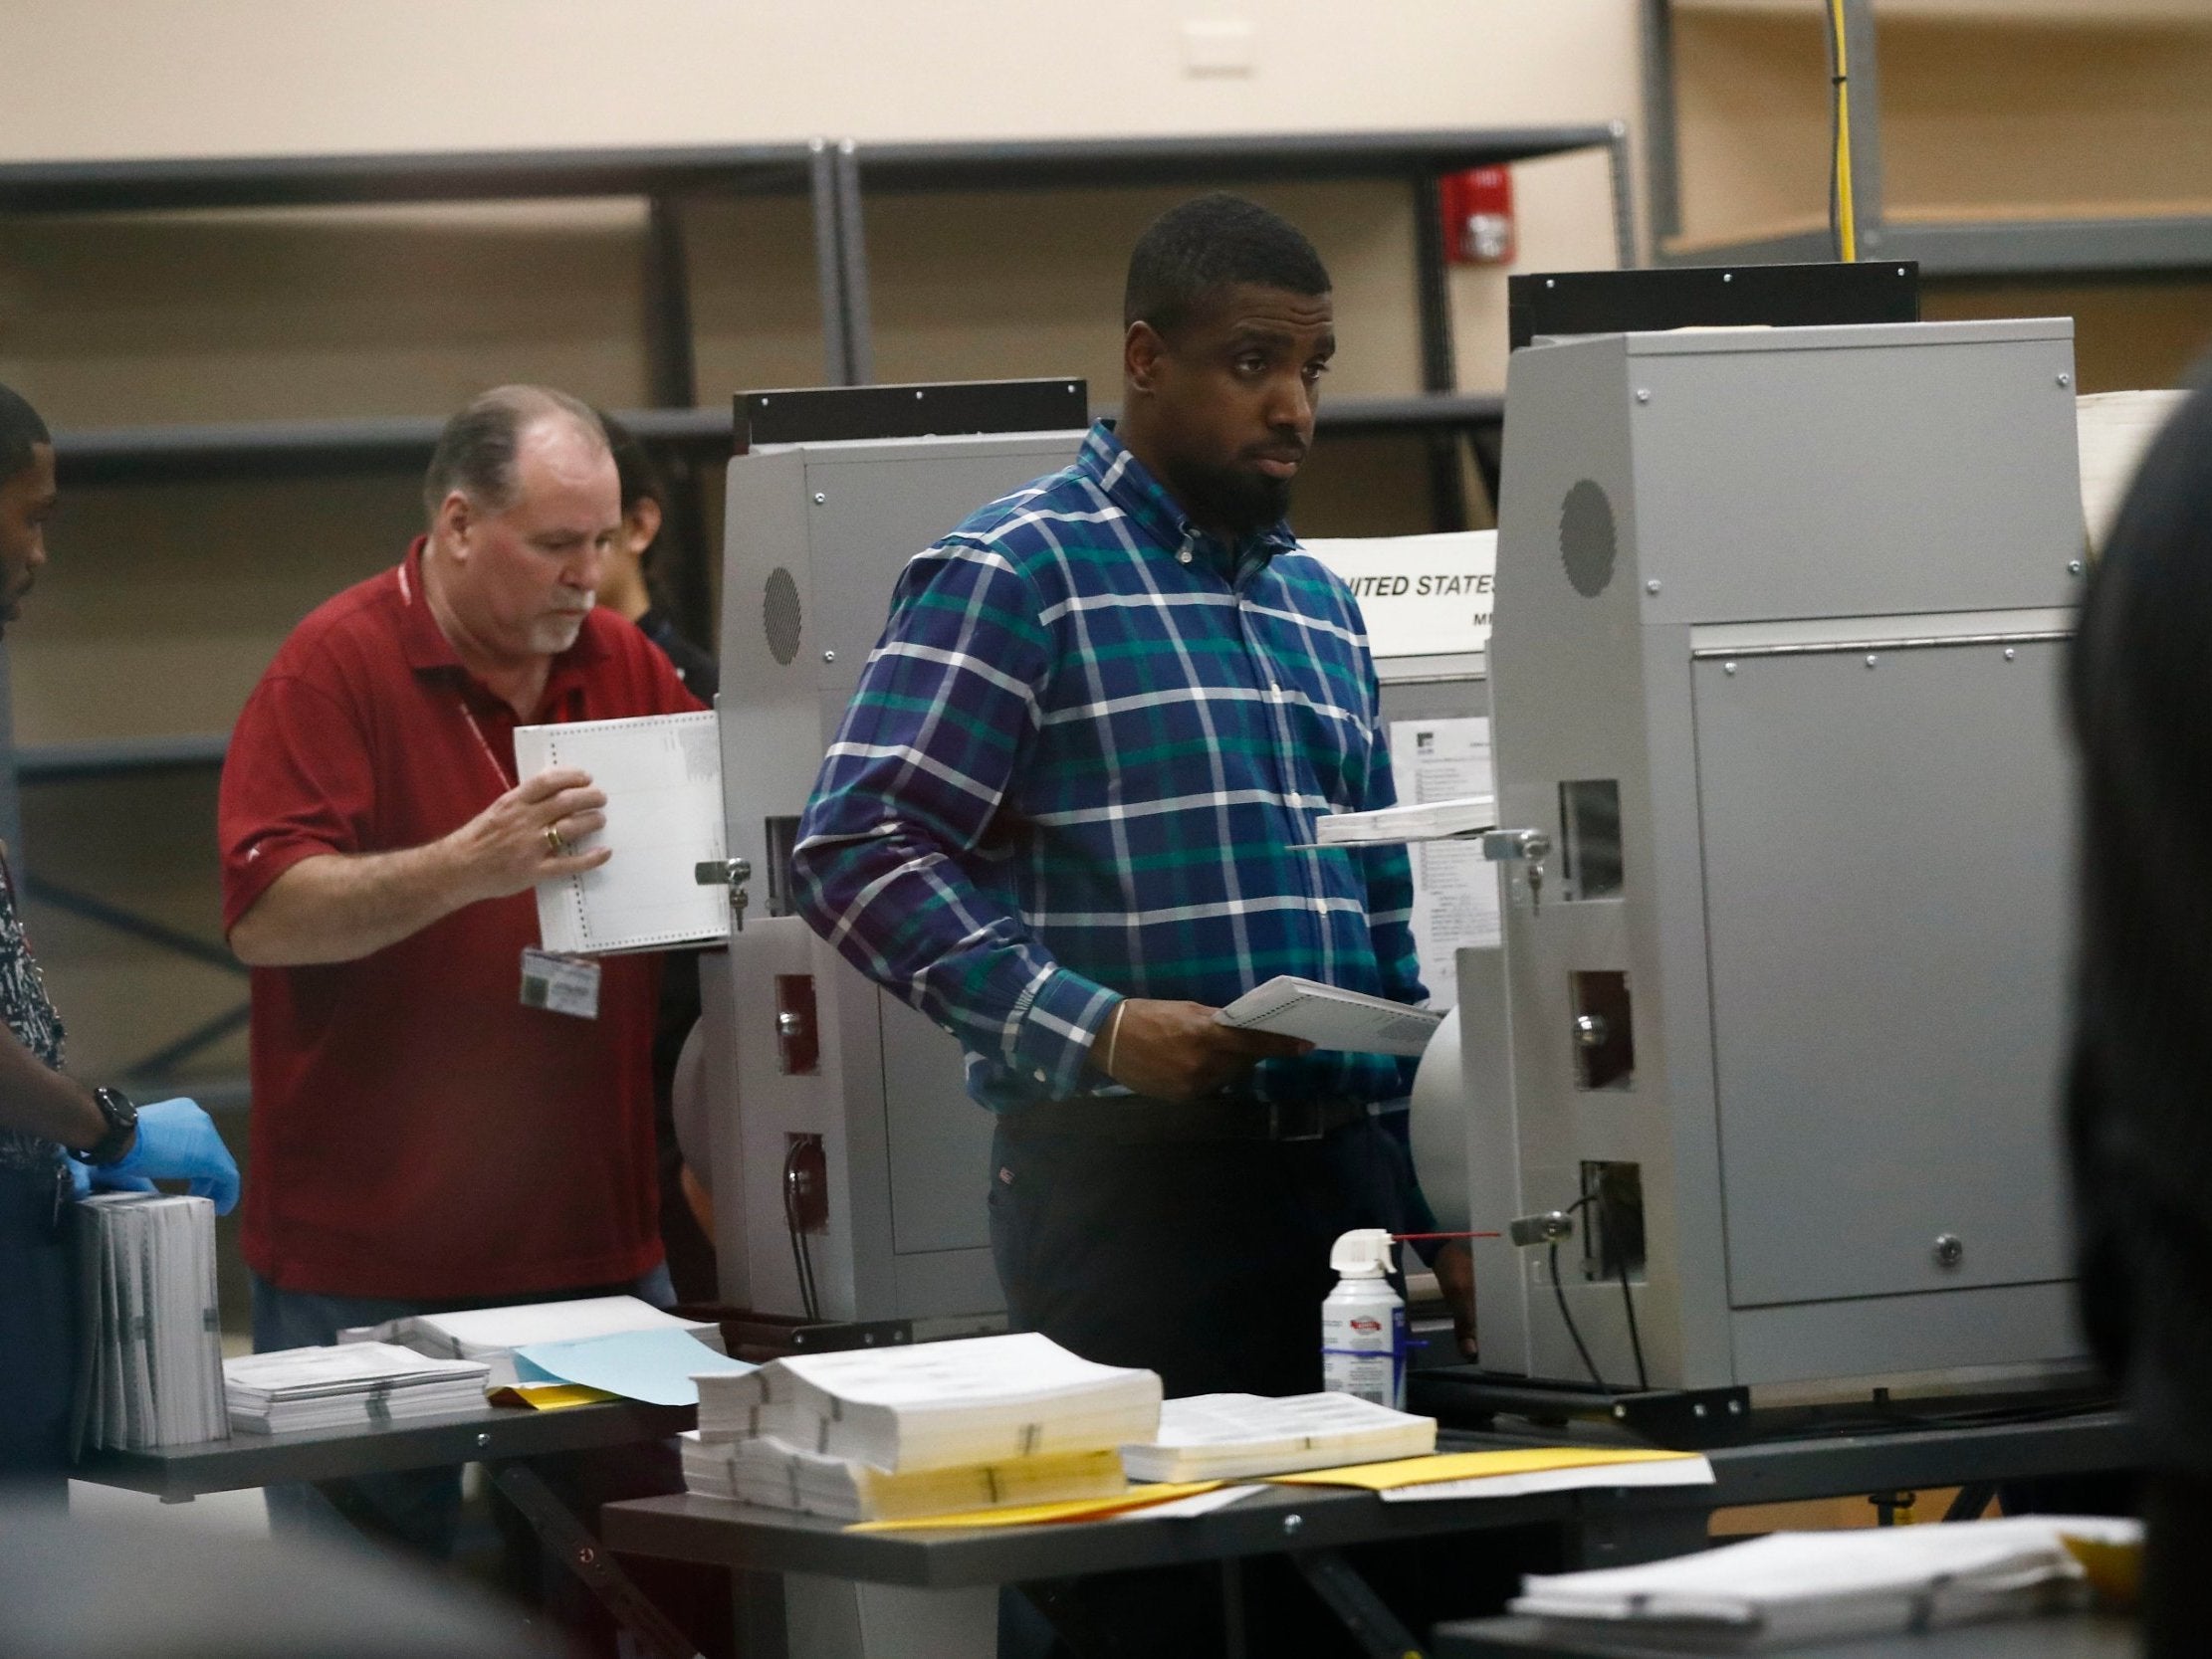 The recount has seen a flurry of lawsuits from Democrats and Republicans alike